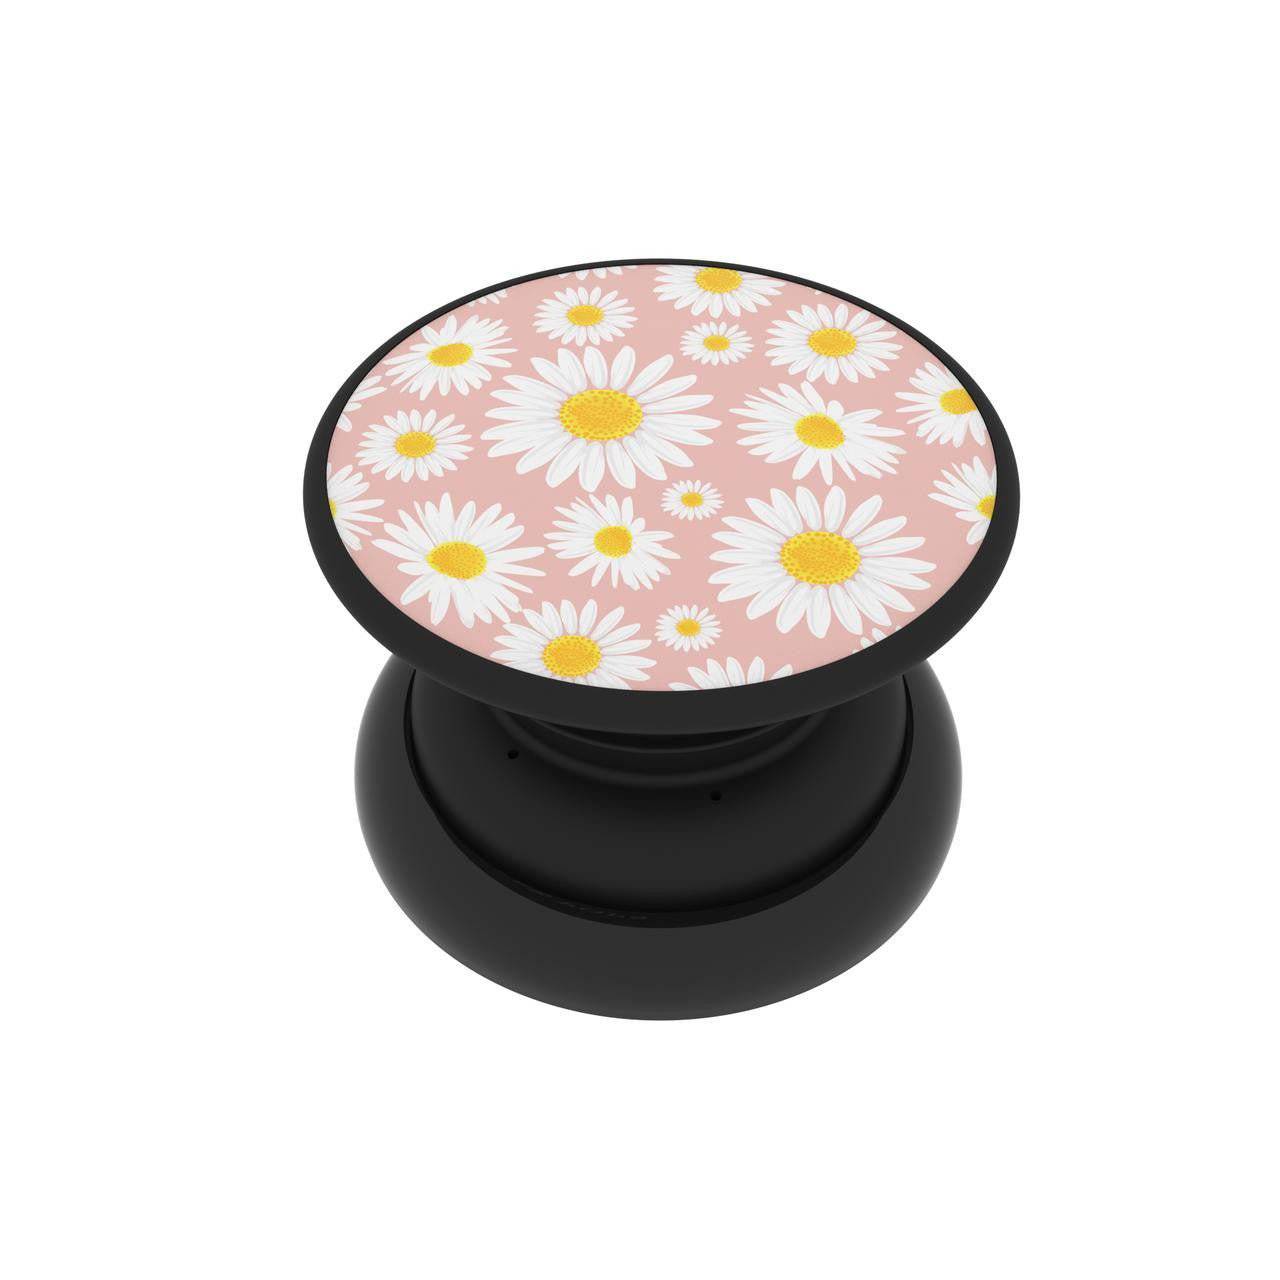 Magnetic Phone Grip and Stand with built in magnets (Daisies)